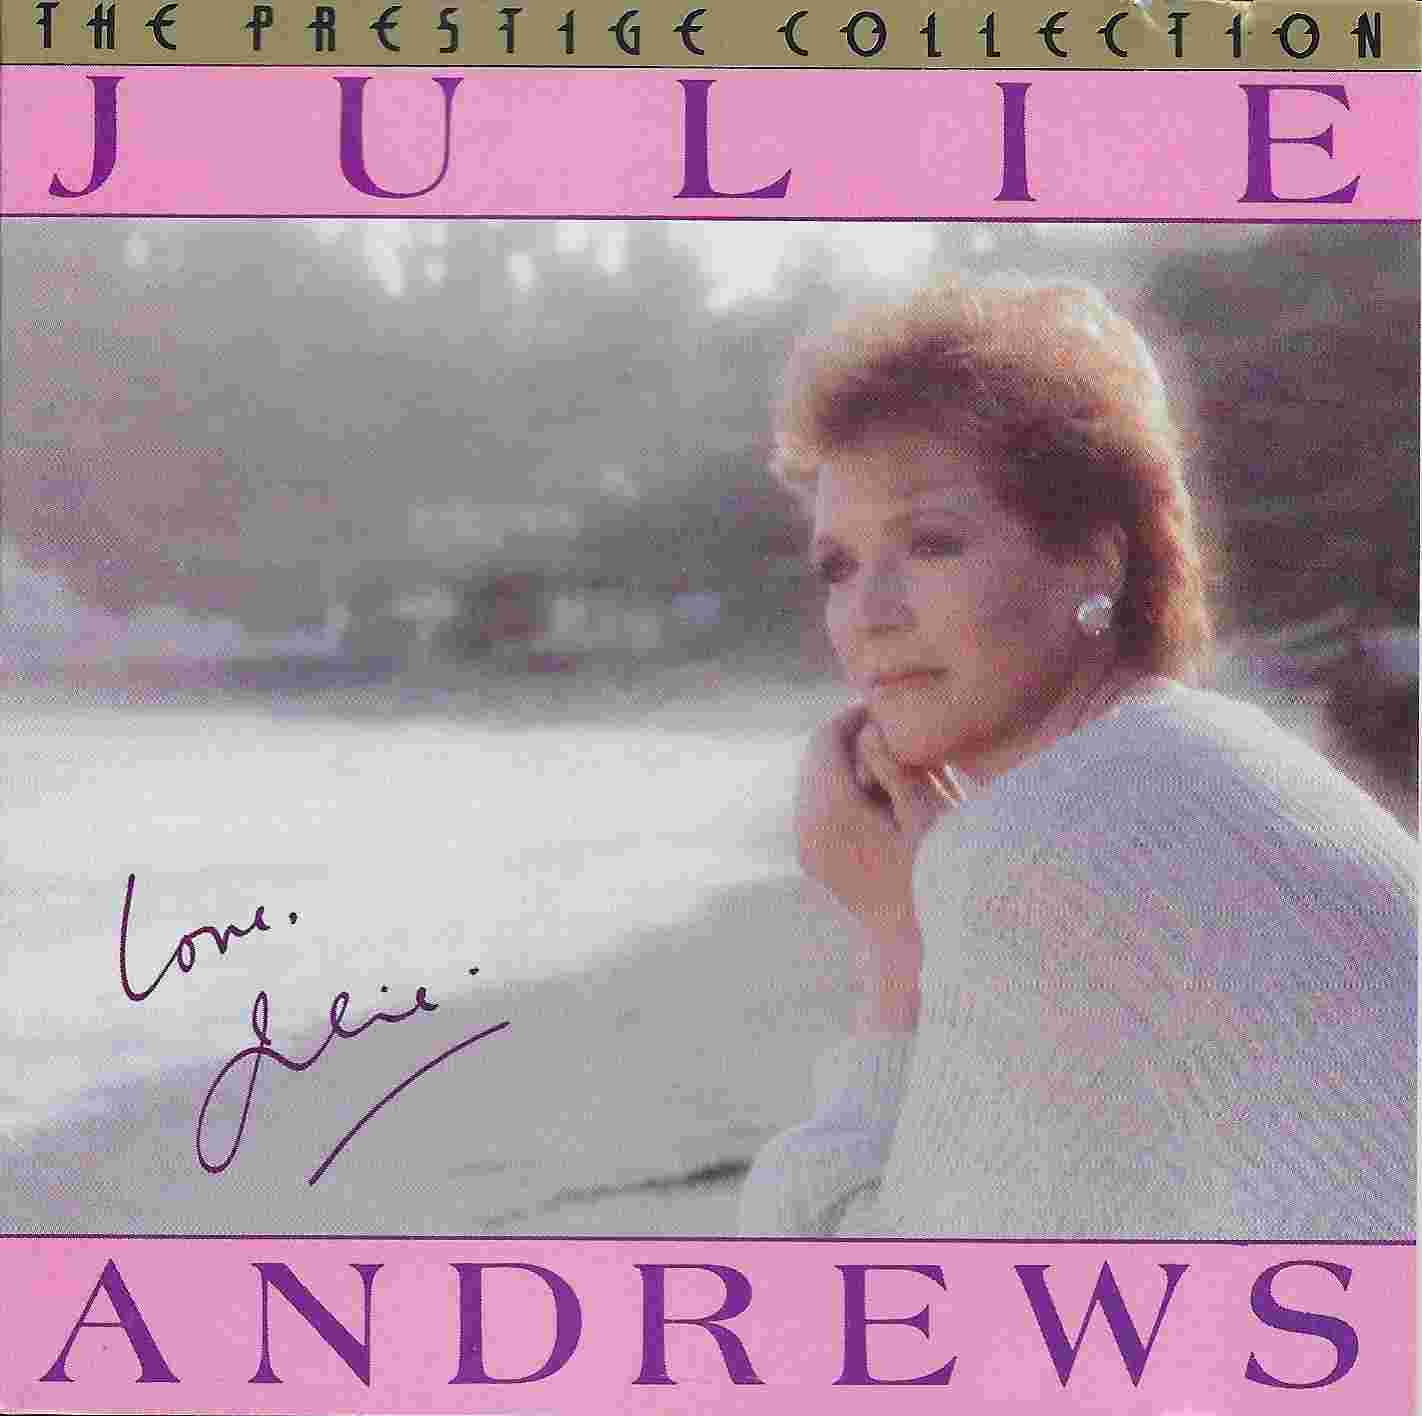 Picture of Love, Julie by artist Julie Andrews from the BBC cds - Records and Tapes library